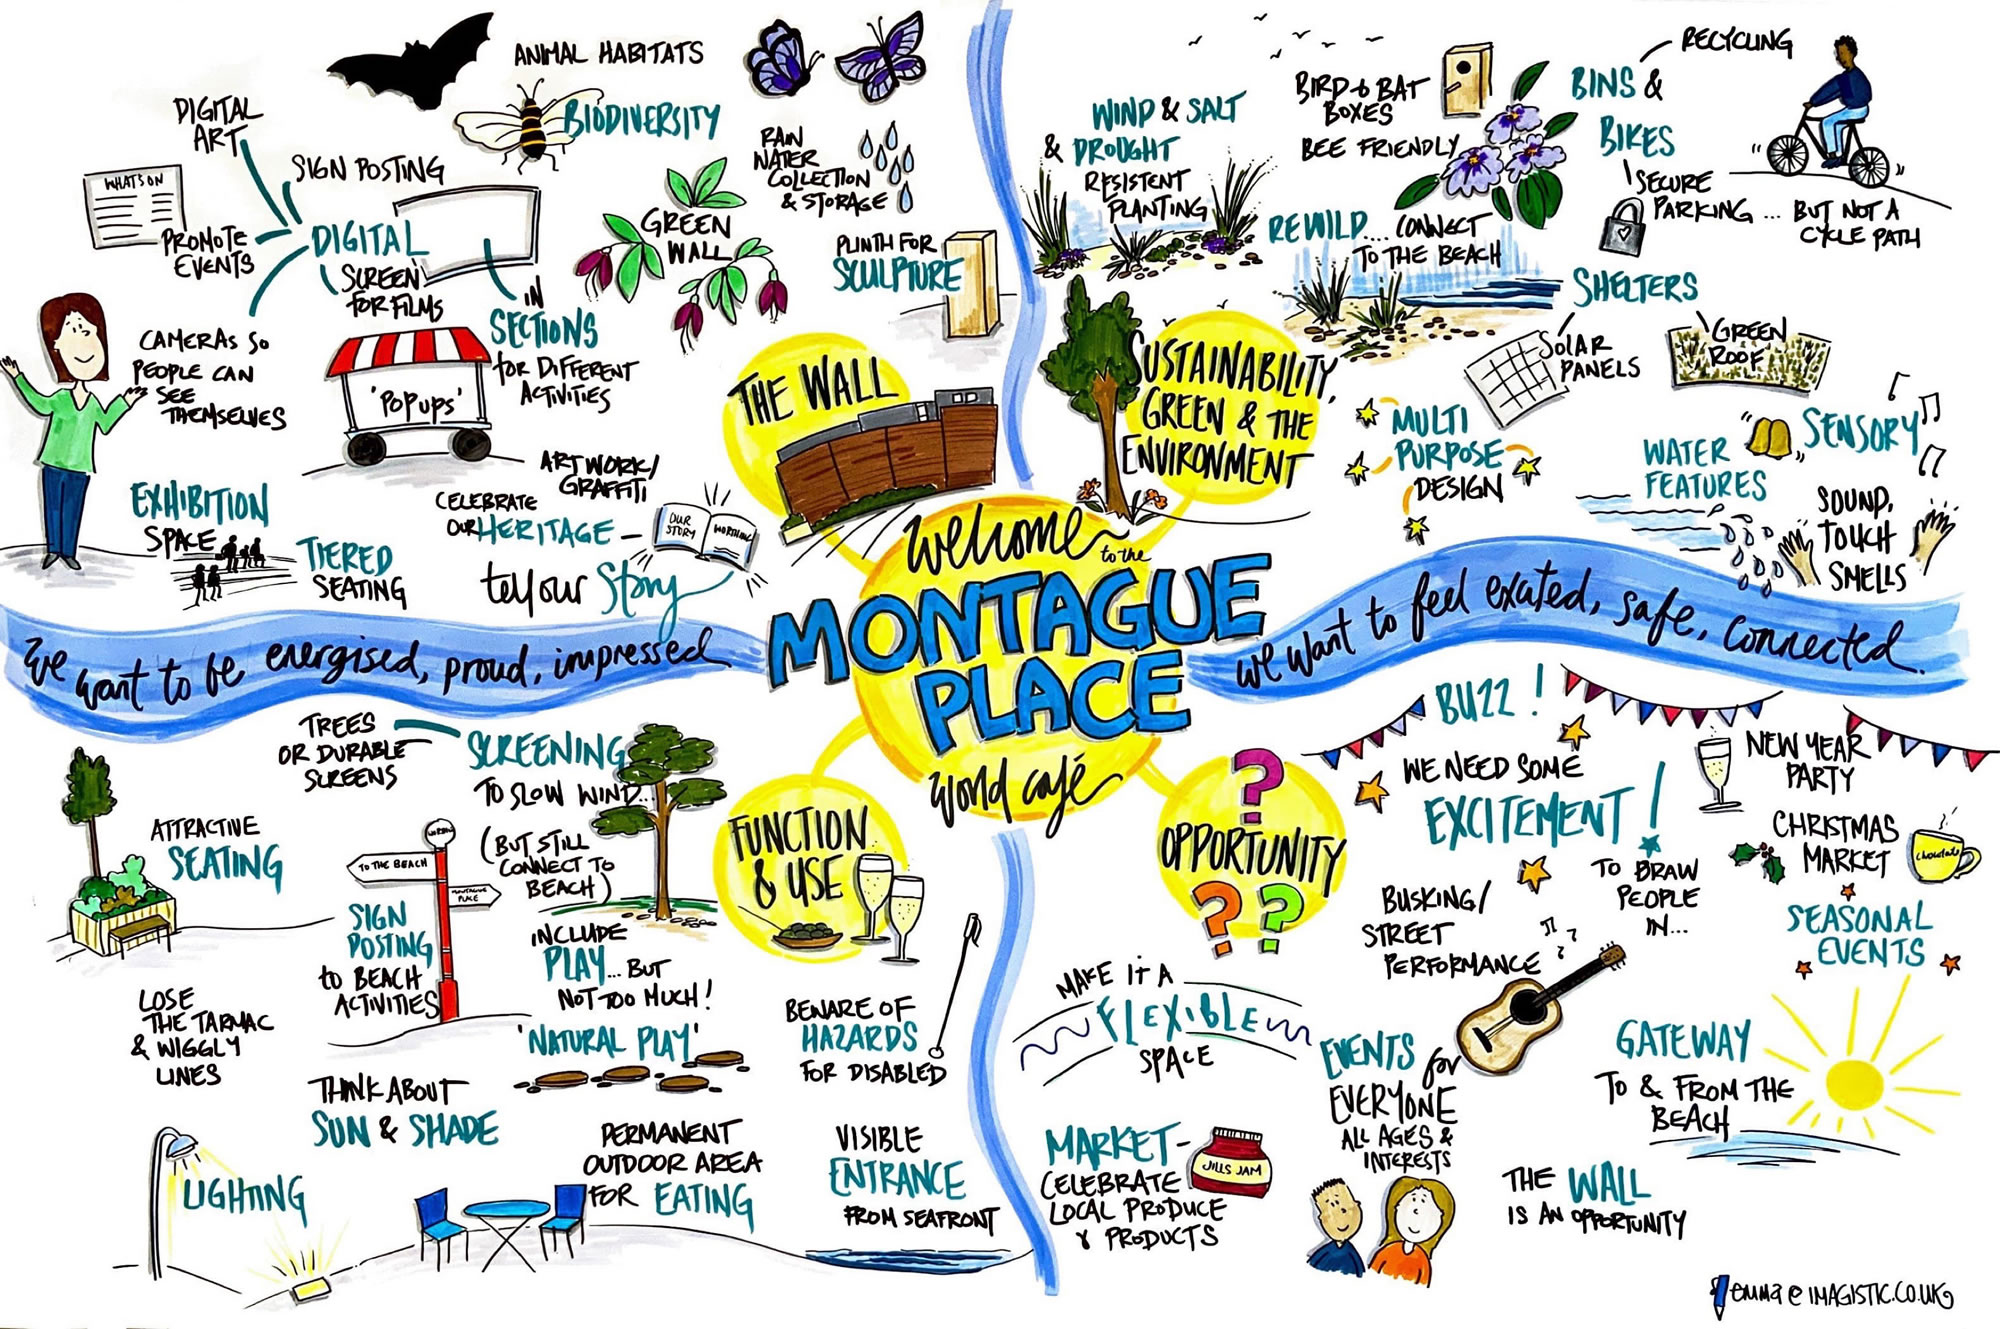 Montague Place - word cloud showing what is in the surrounding area (click for a larger copy of the image)